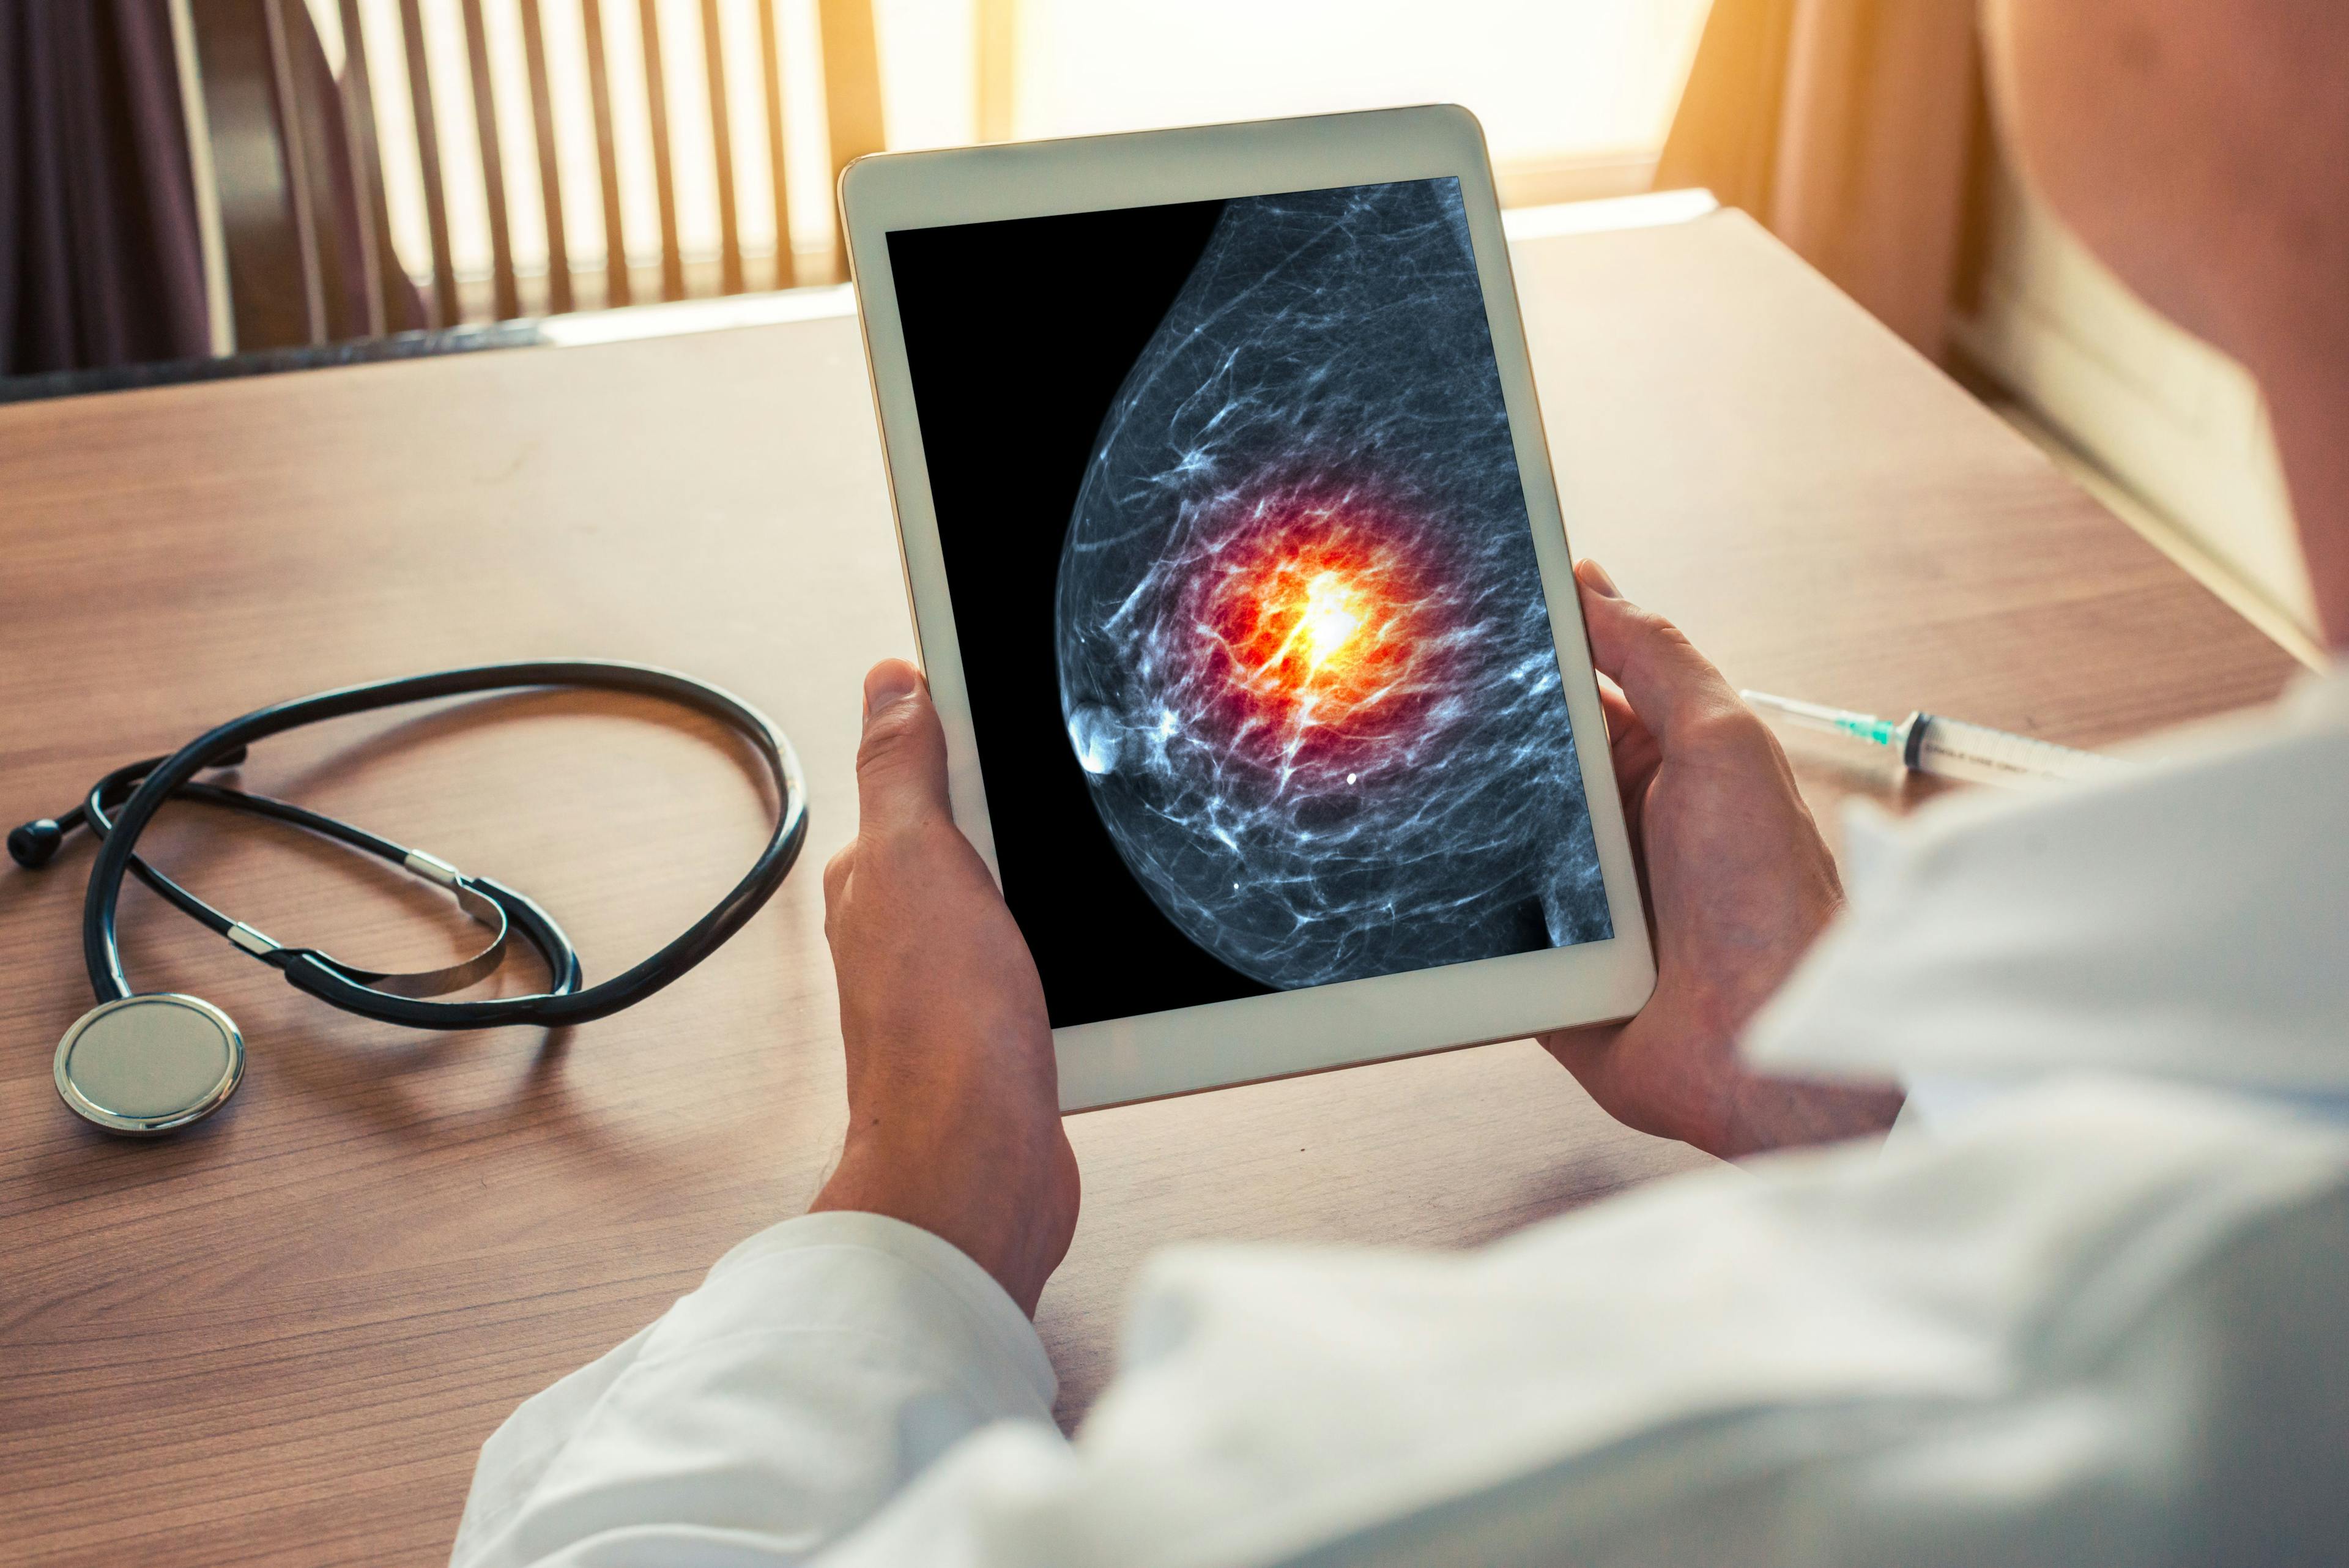 Doctor holding a digital tablet with xray mammogram skeleton. Breast cancer prevention. Credit: steph photographies - stock.adobe.com